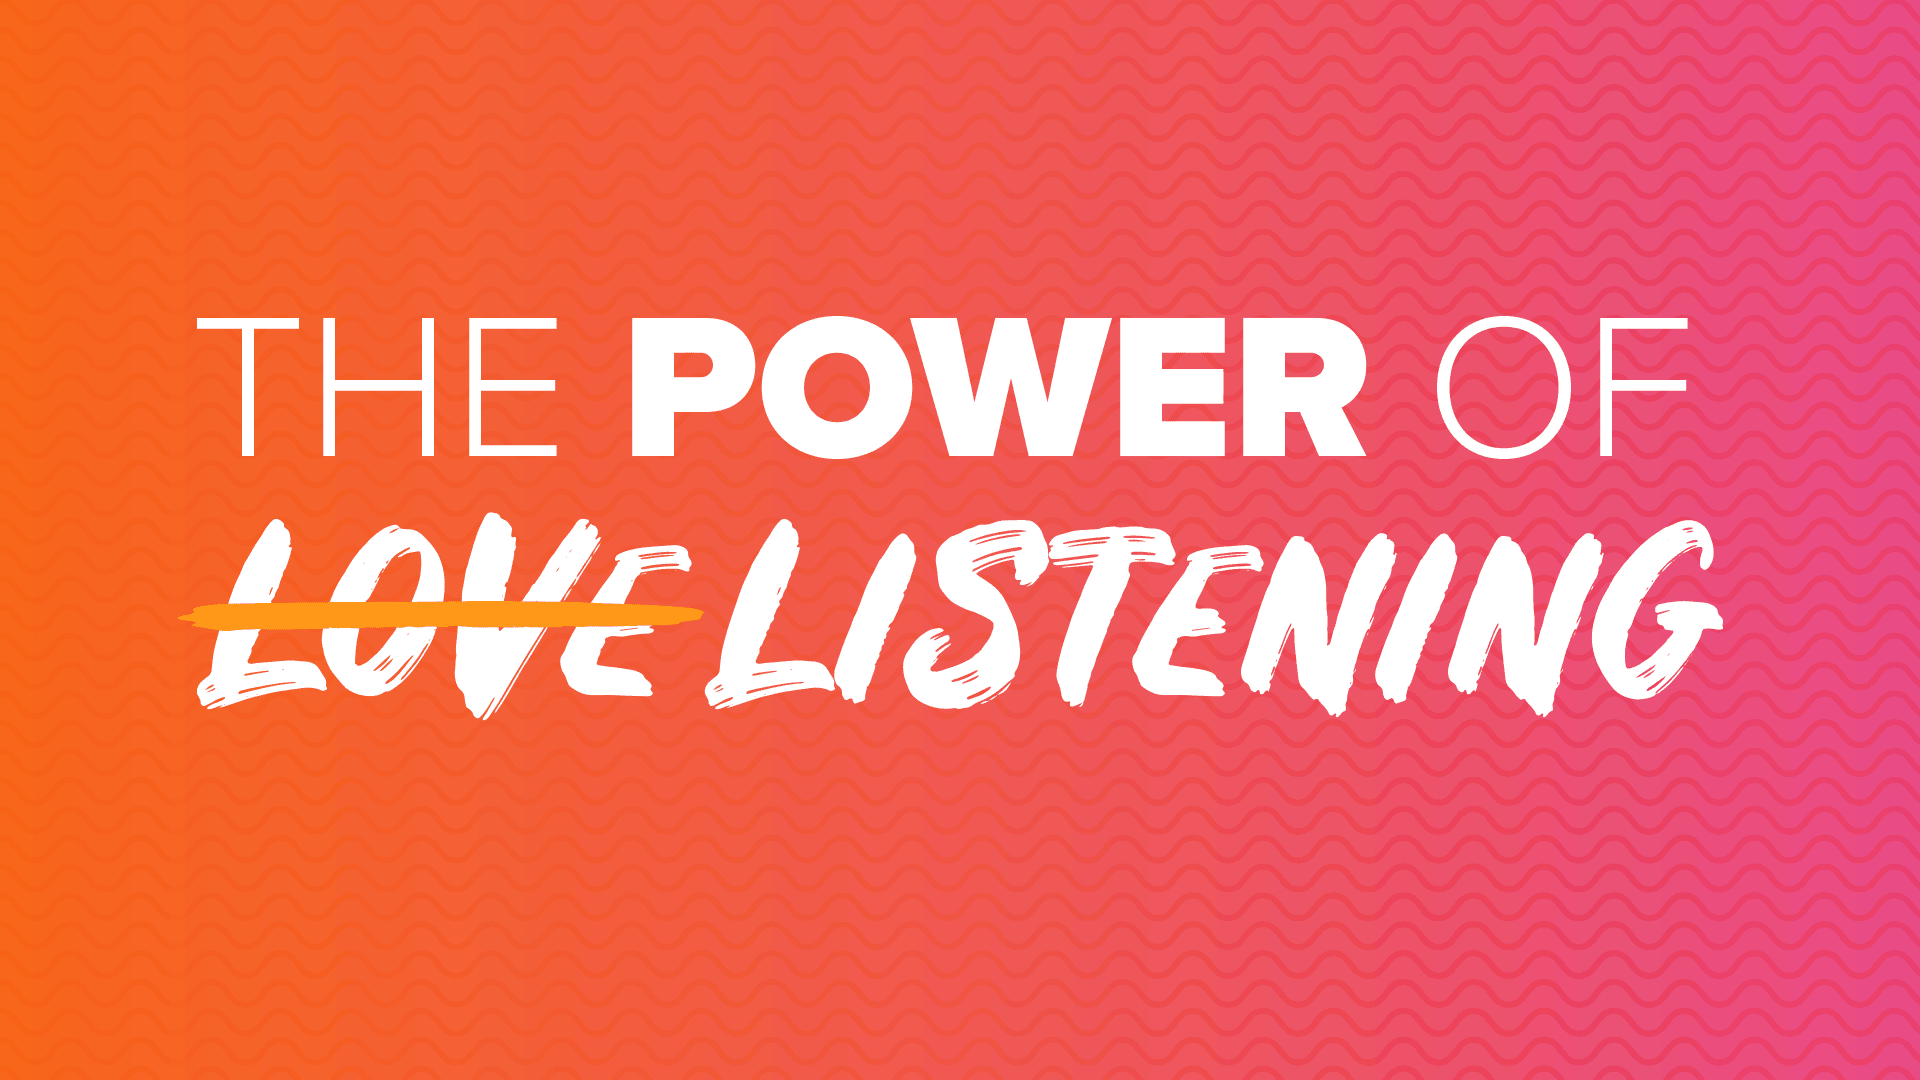 The Power Of Listening